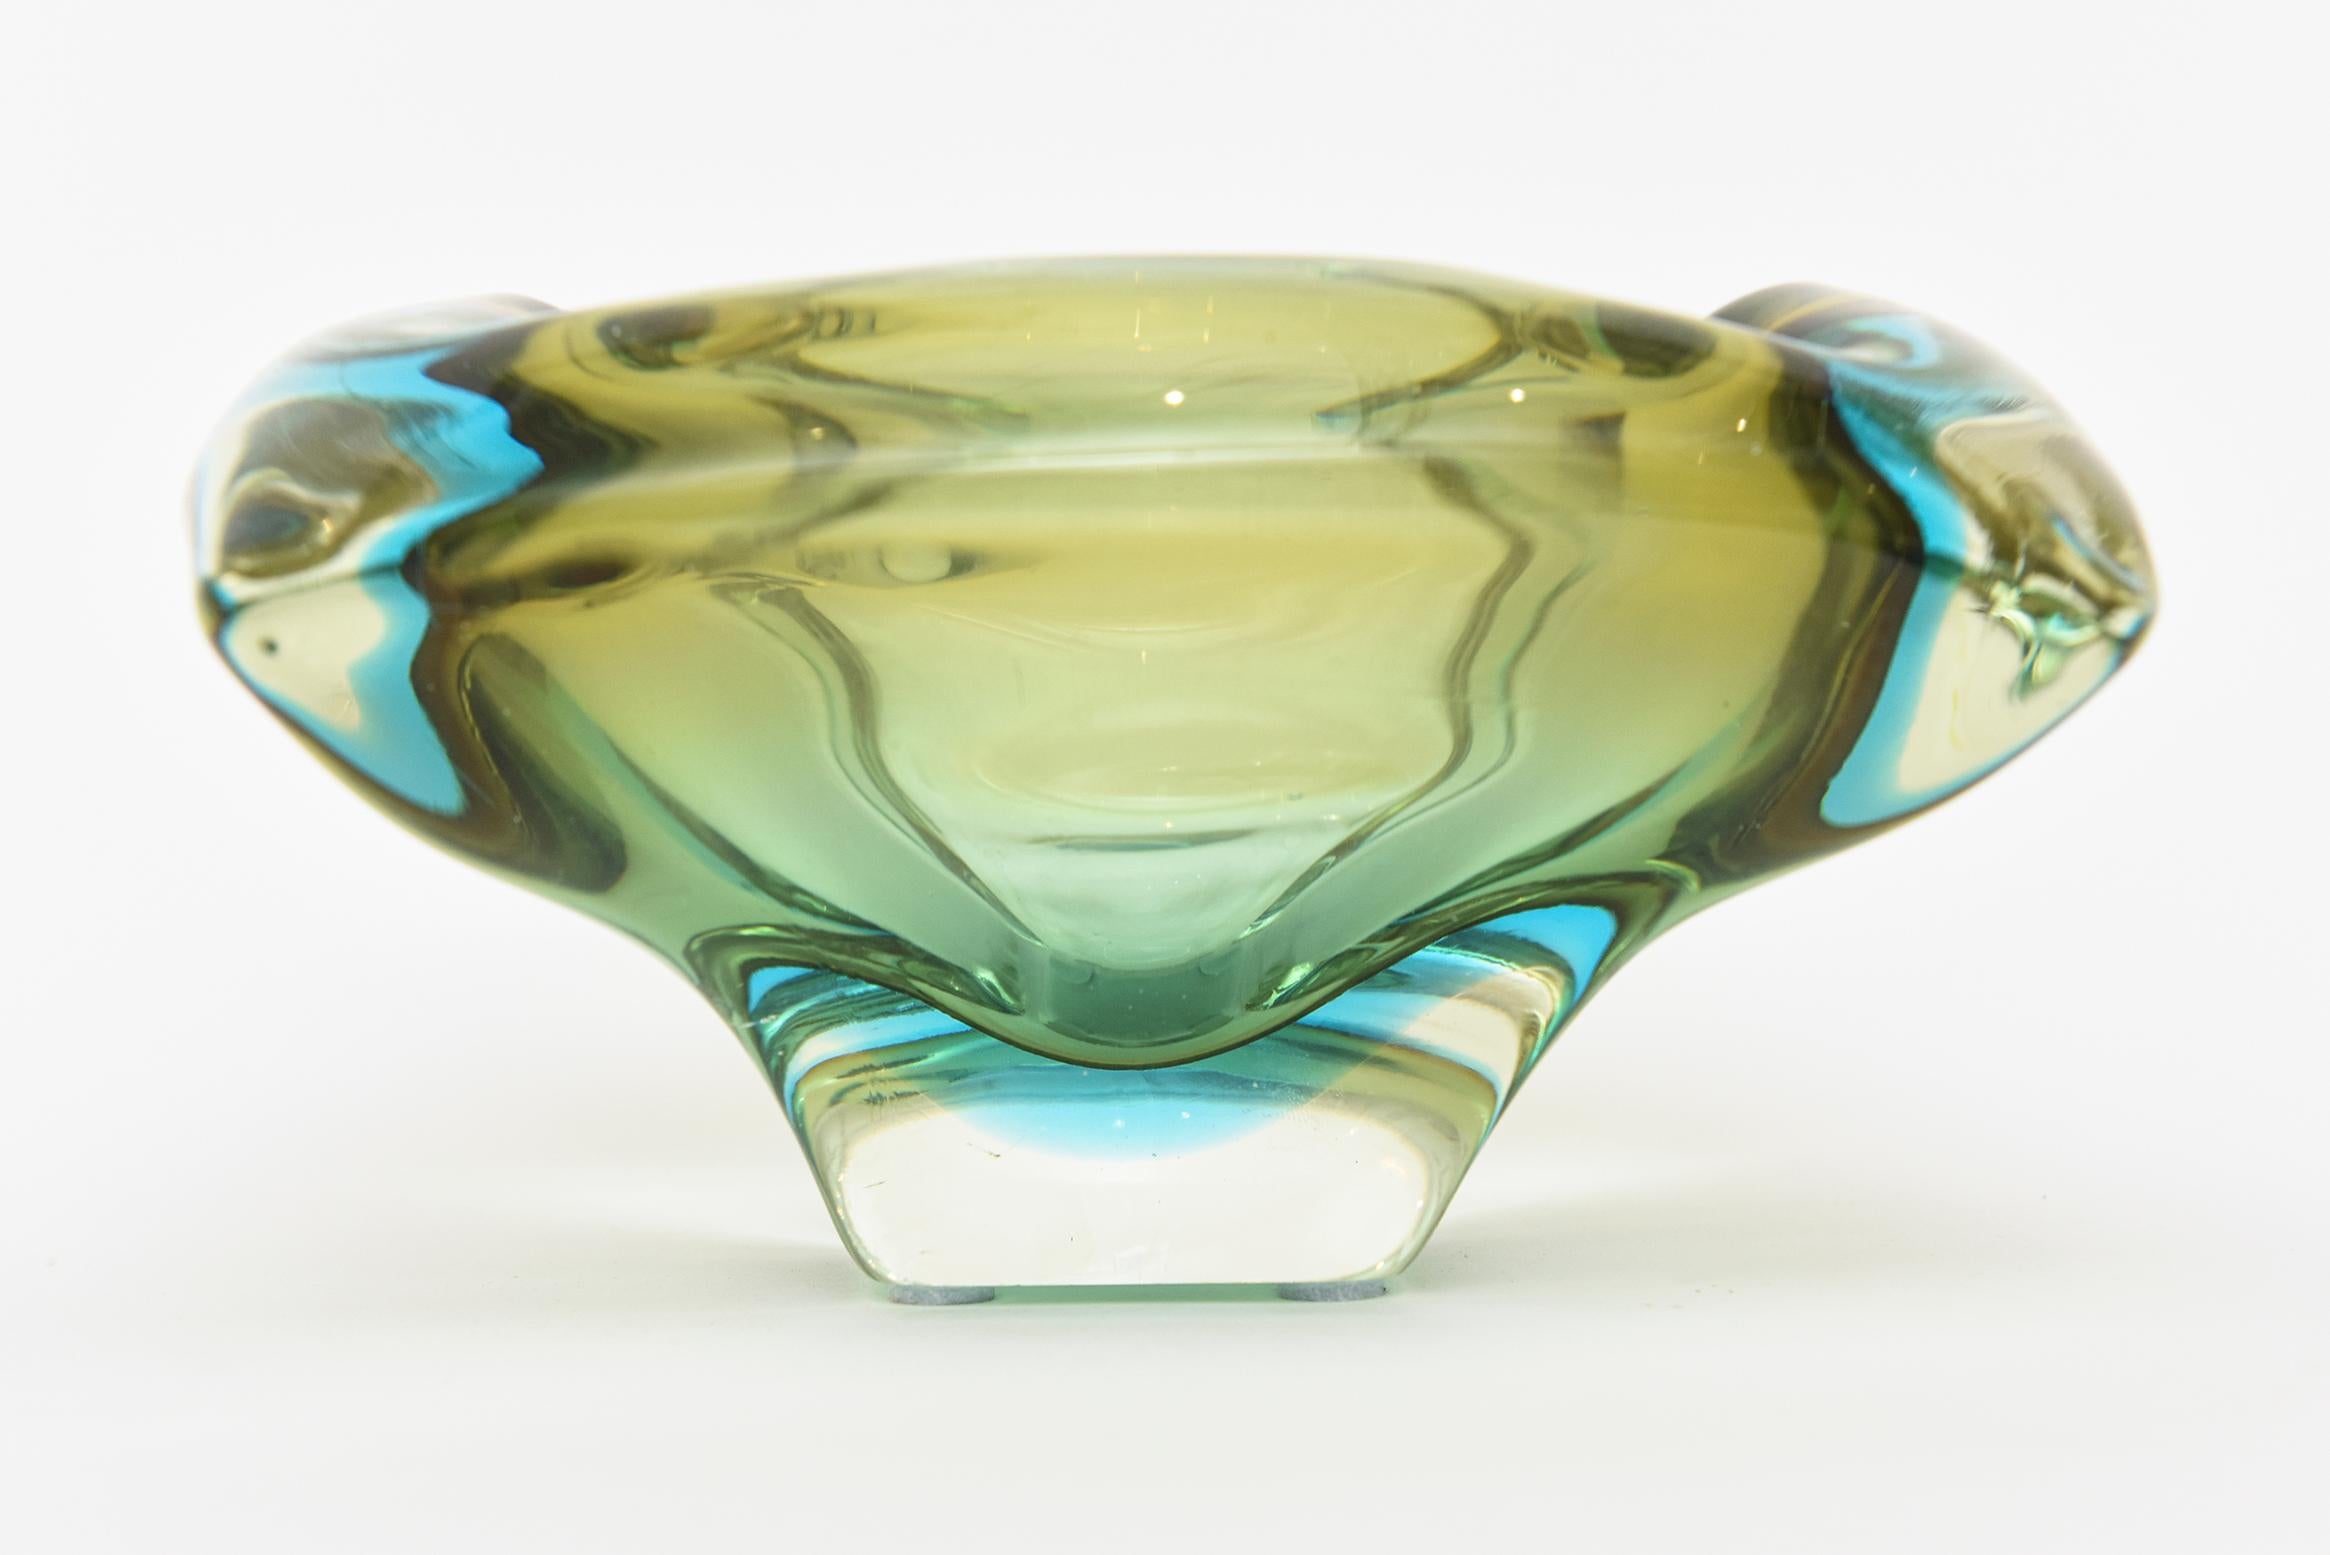 Flavio Poli Murano Sommerso Turquoise and Green Glass Bowl / Ashtray Vintage (Italienisch) im Angebot